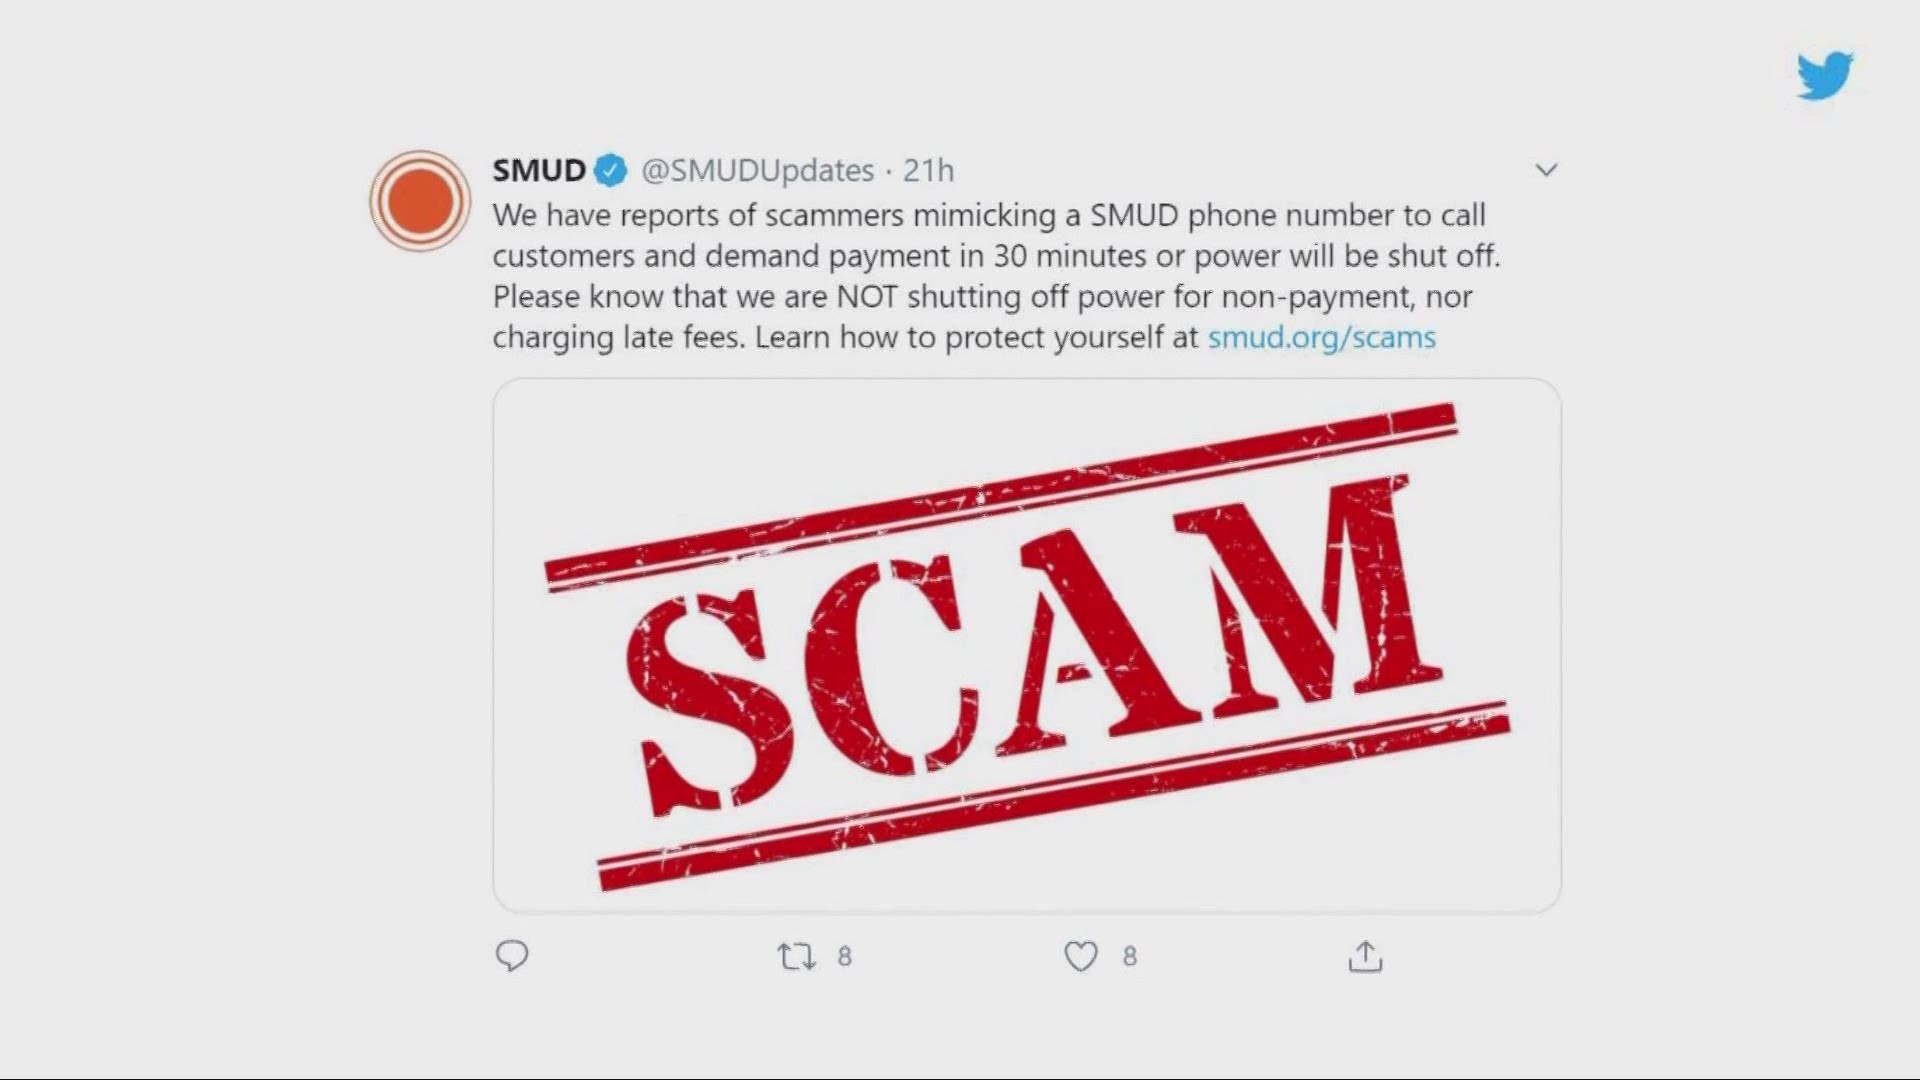 A phone scam making the rounds is alleging SMUD will turn off your power if you don't make an immediate payment. That's not true.